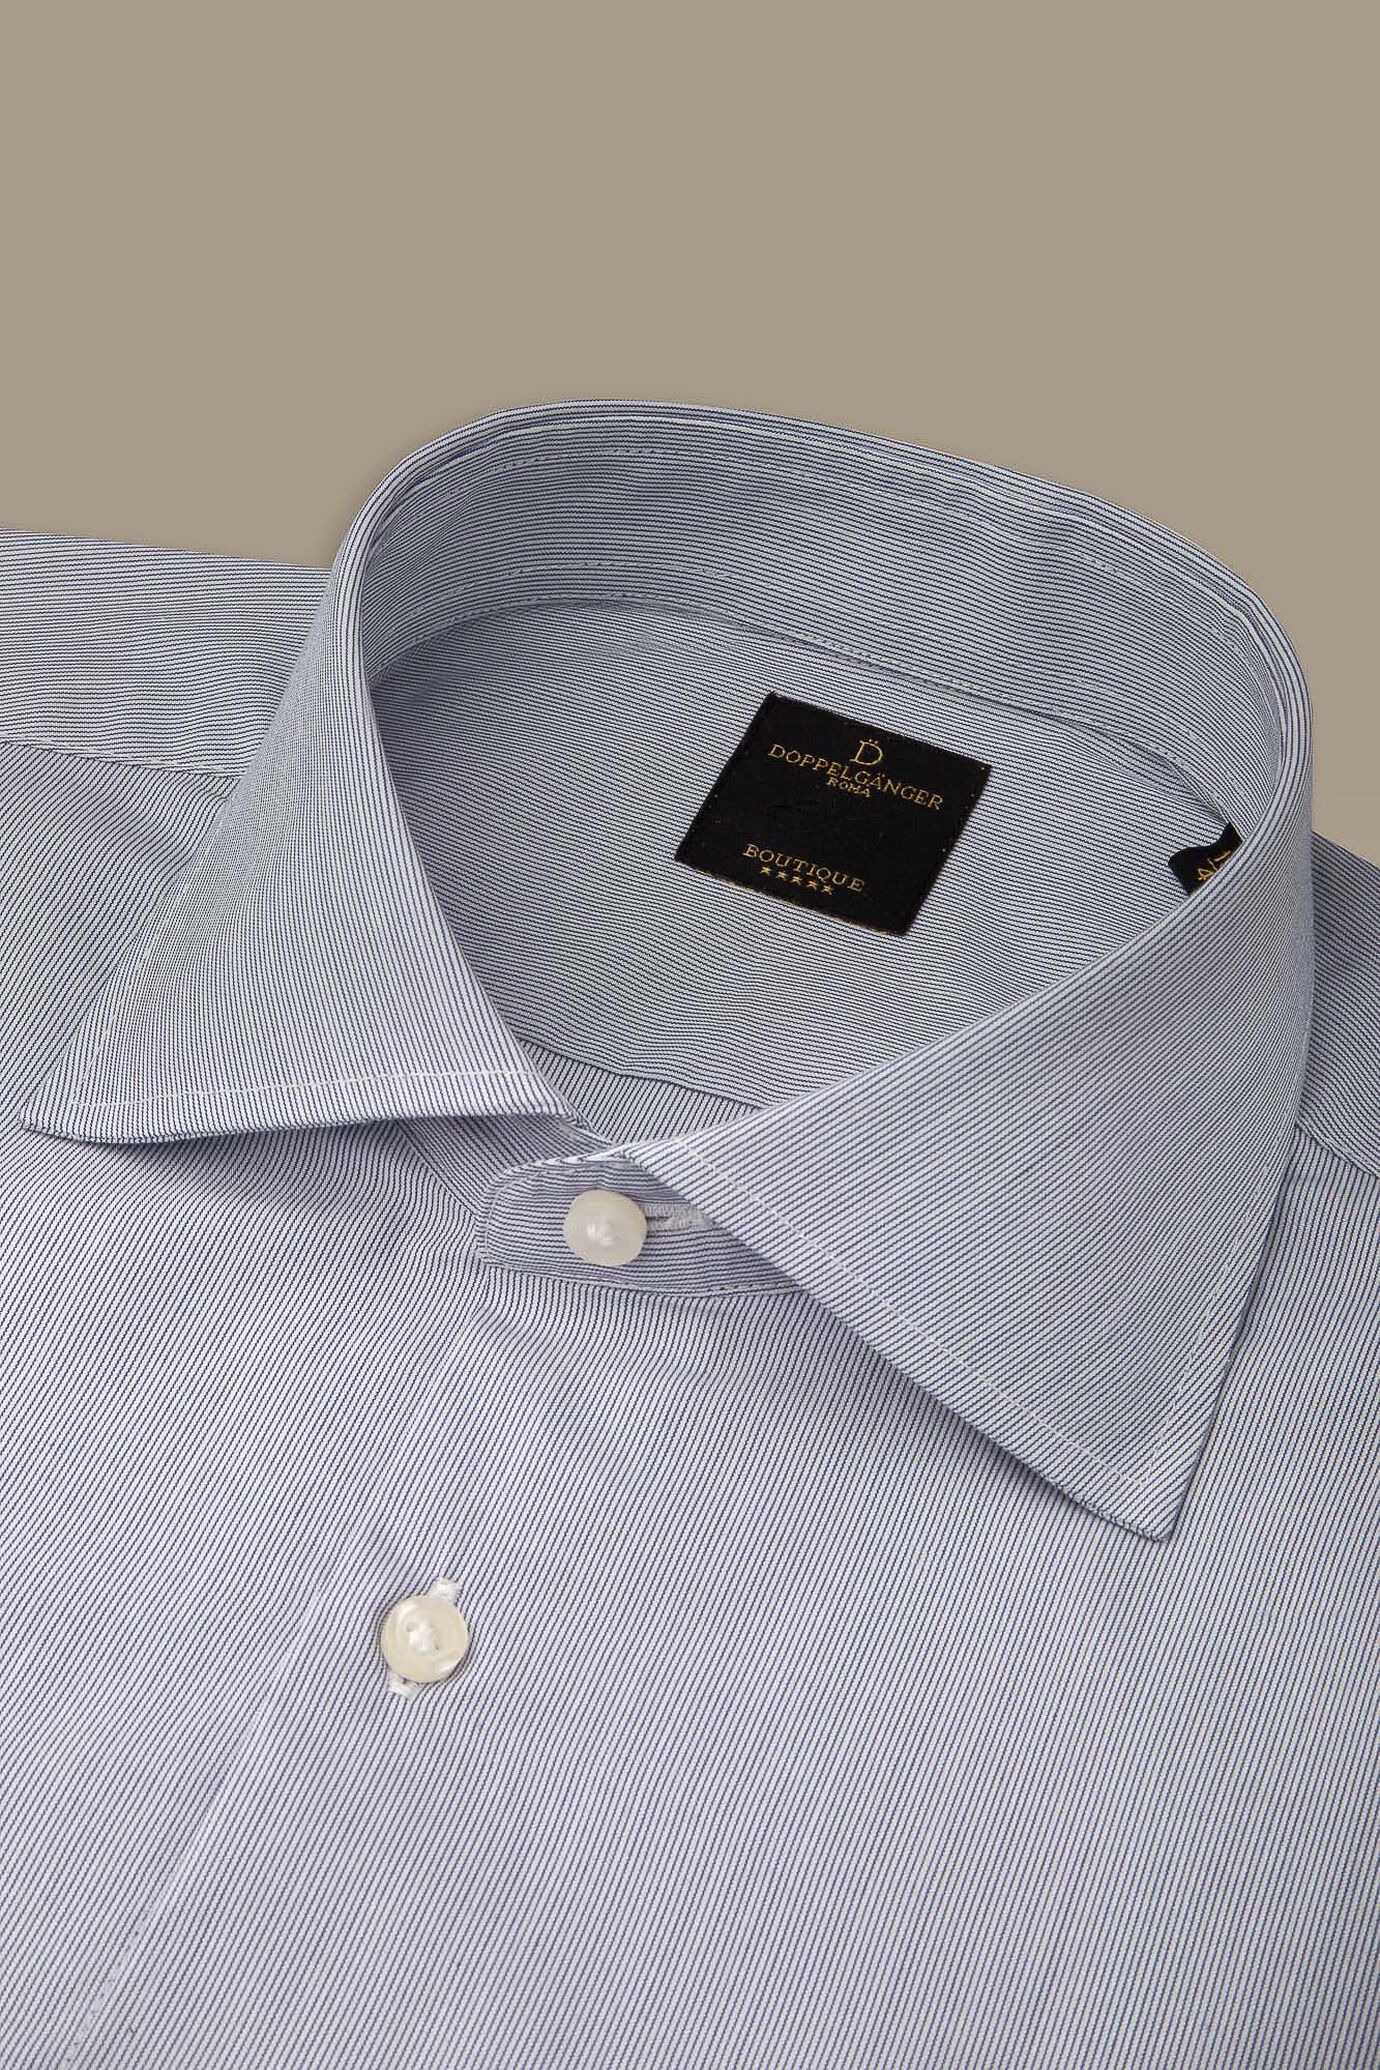 French collar classic shirt yarn dyed thin stripes image number 1